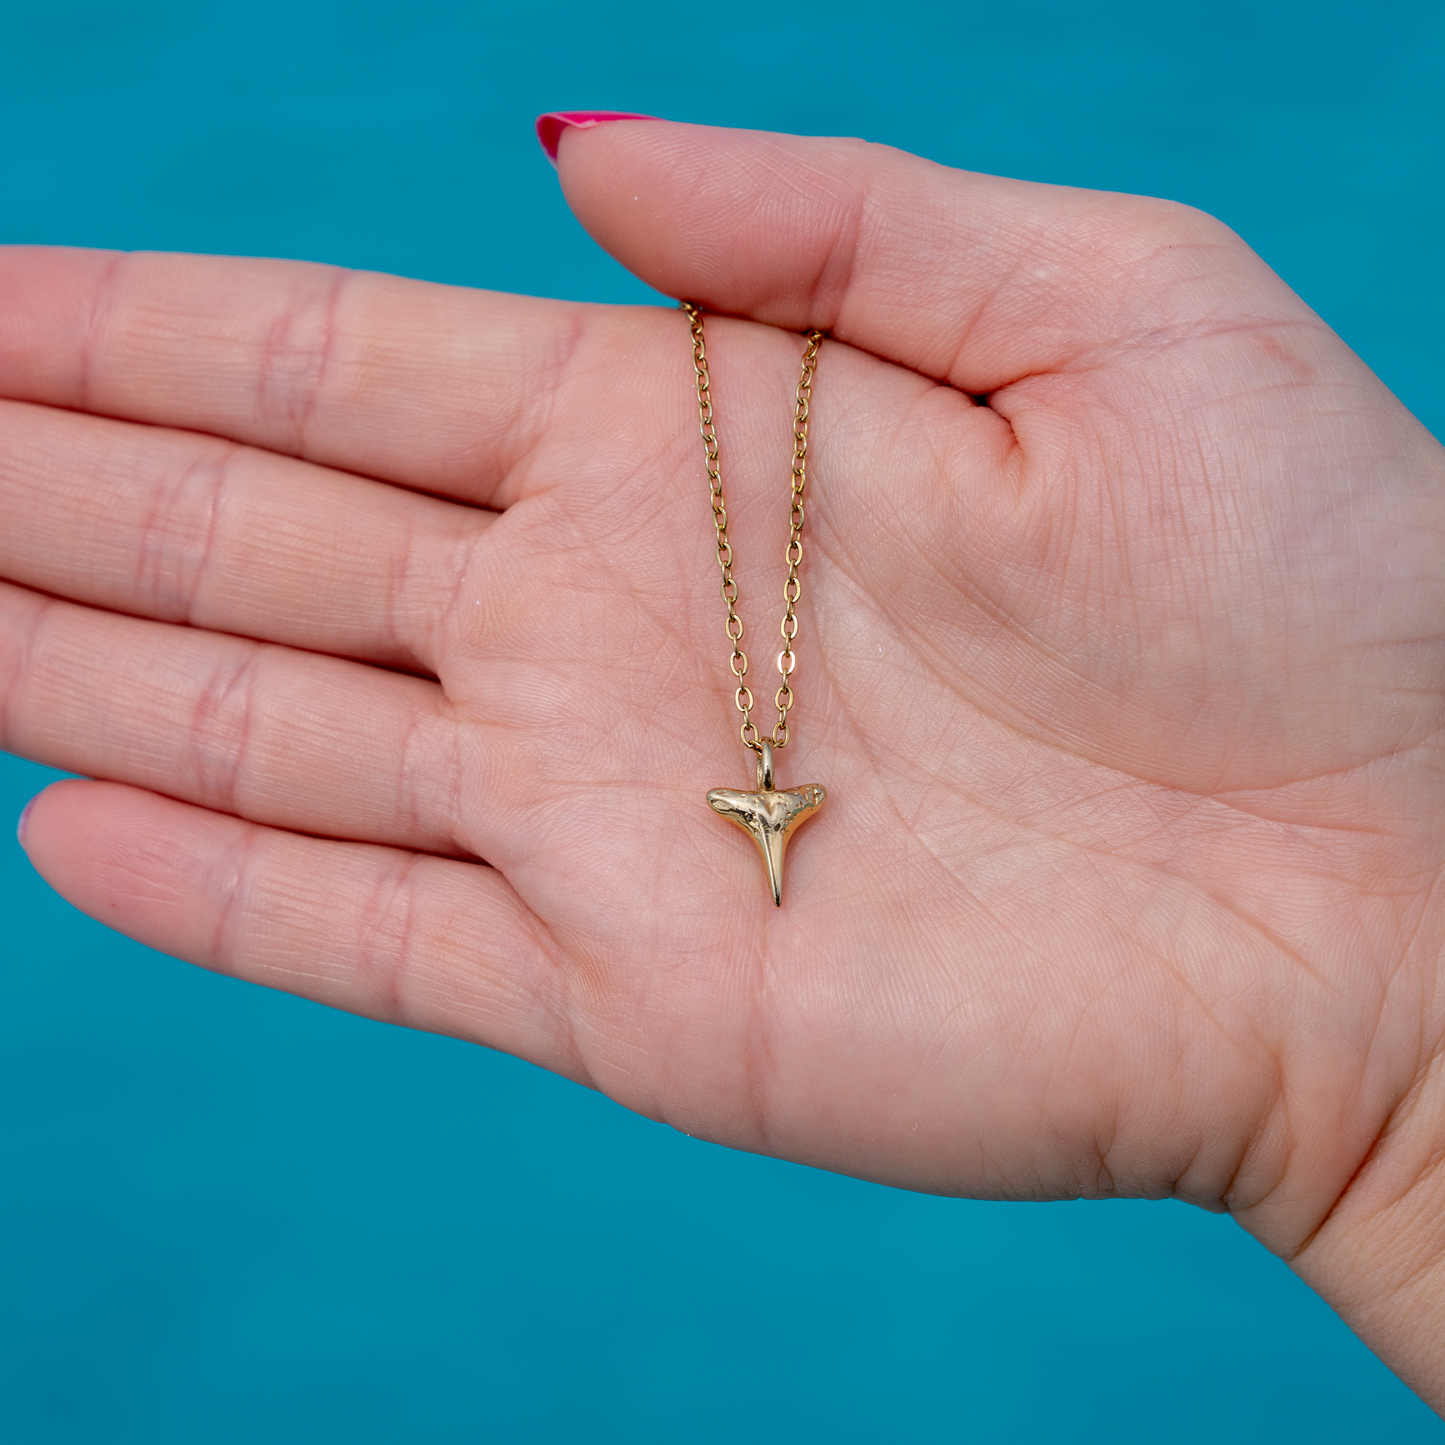 Captivating: Shark Tooth Necklace